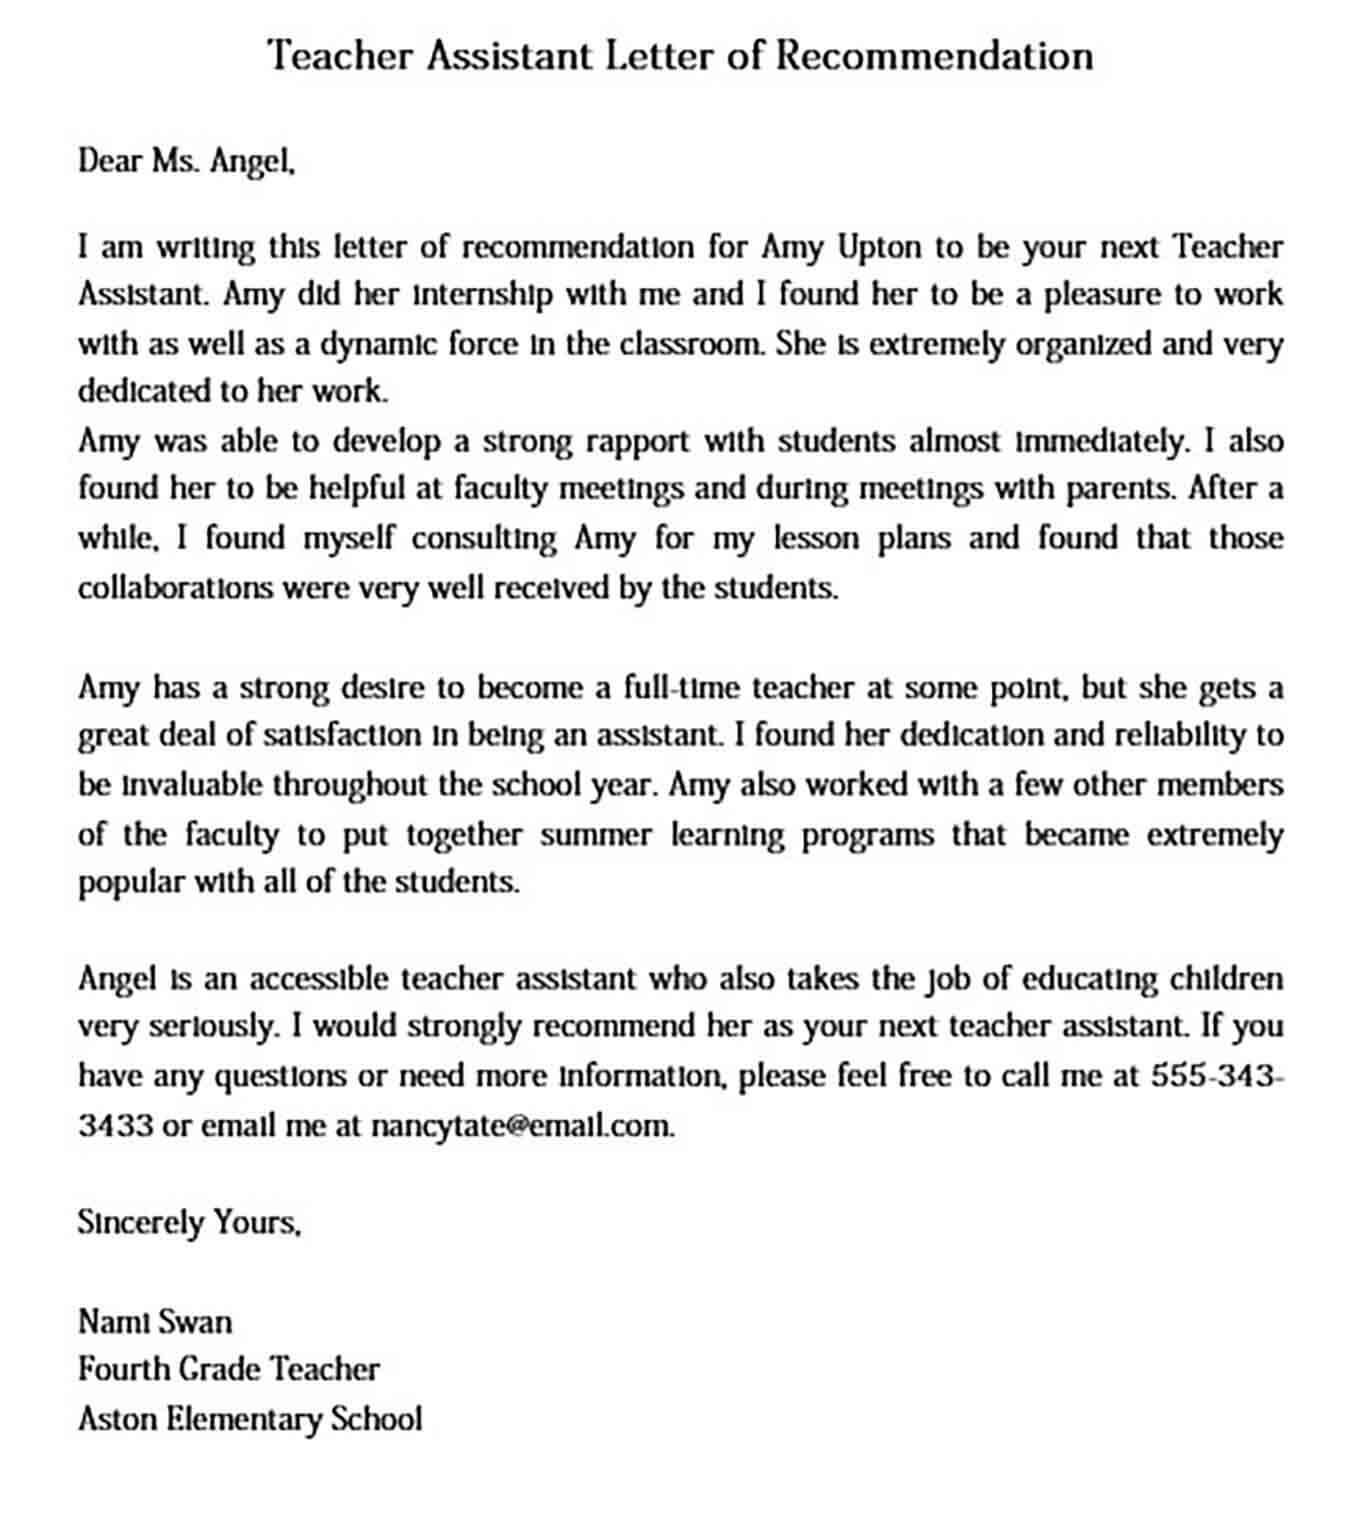 Letter of Recommendation for a Assistant Teacher